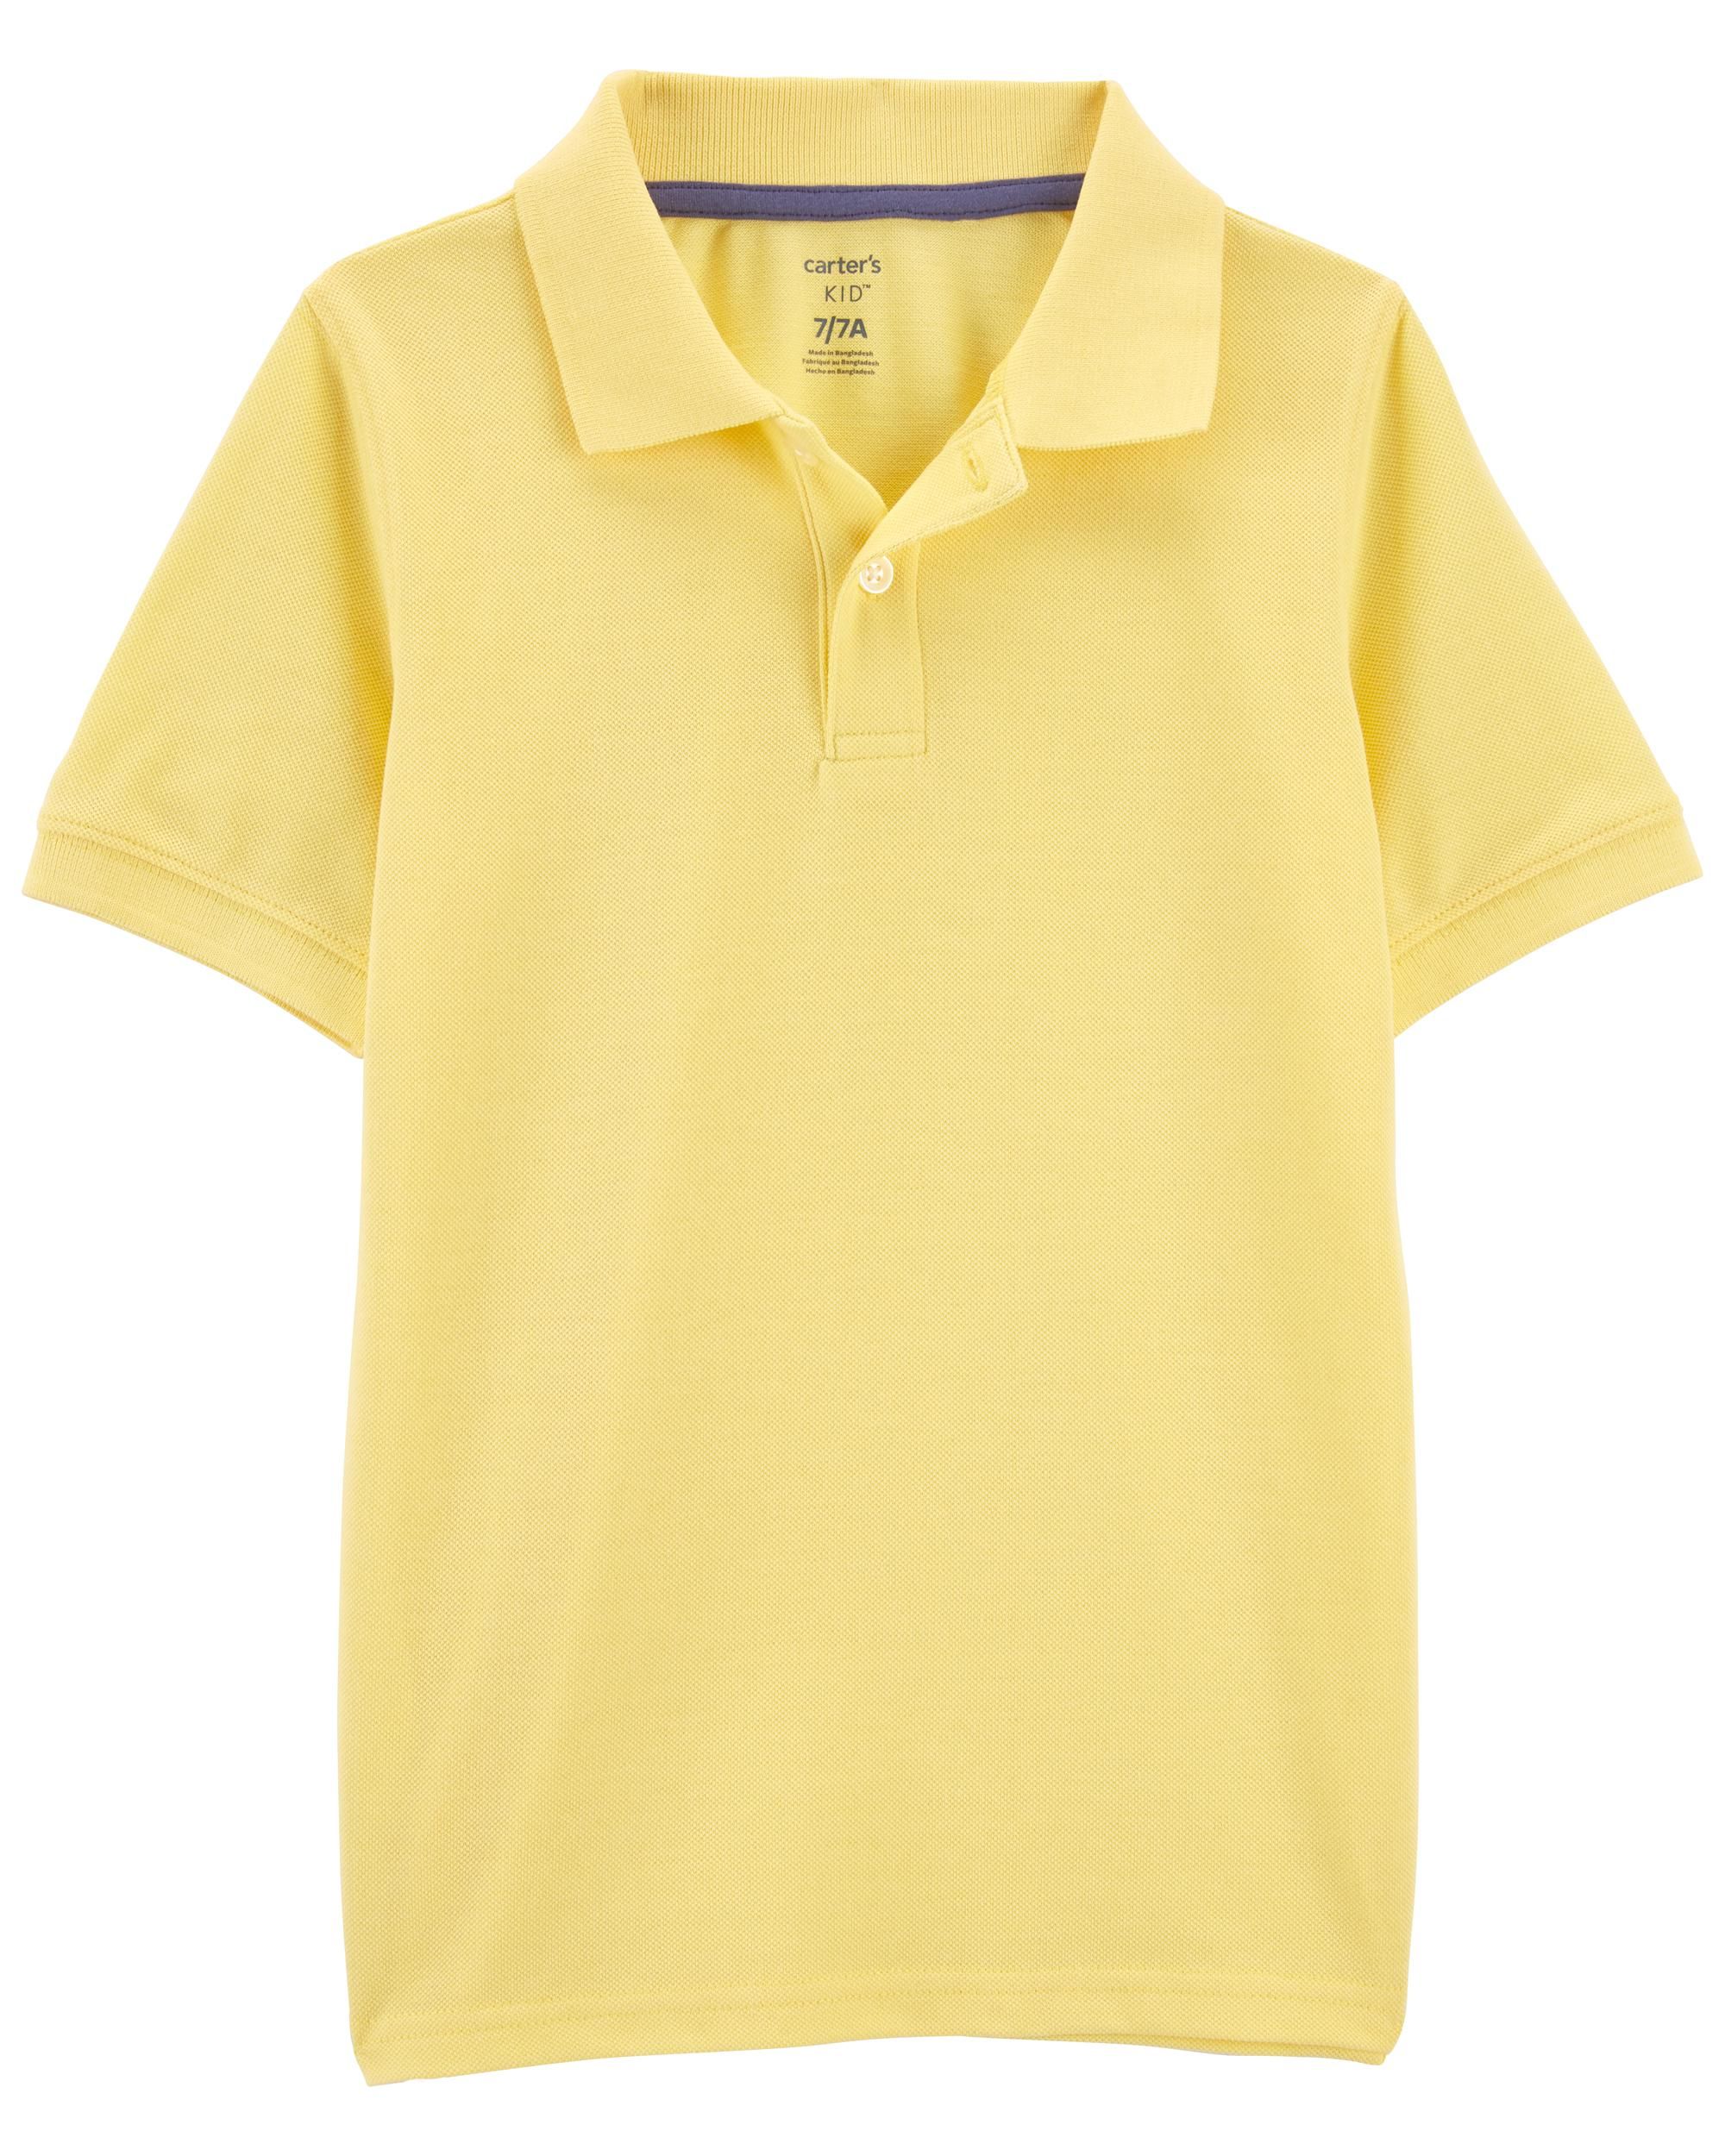 Kid Jersey Polo | Carter's